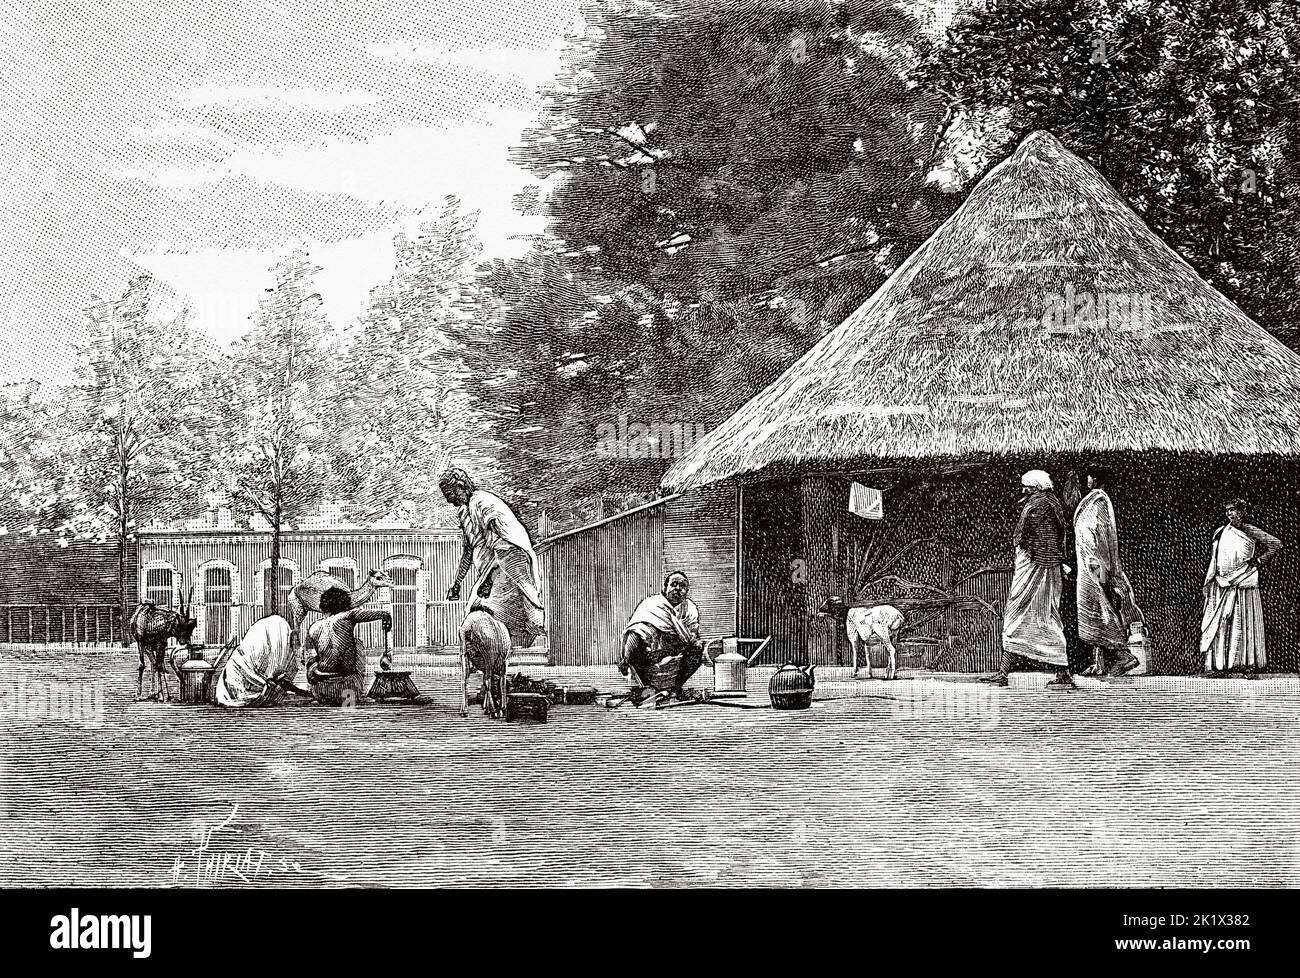 Somali people exposed in the Jardin d'Acclimatation in Paris, France. Old 19th century engraved illustration from La Nature 1890 Stock Photo